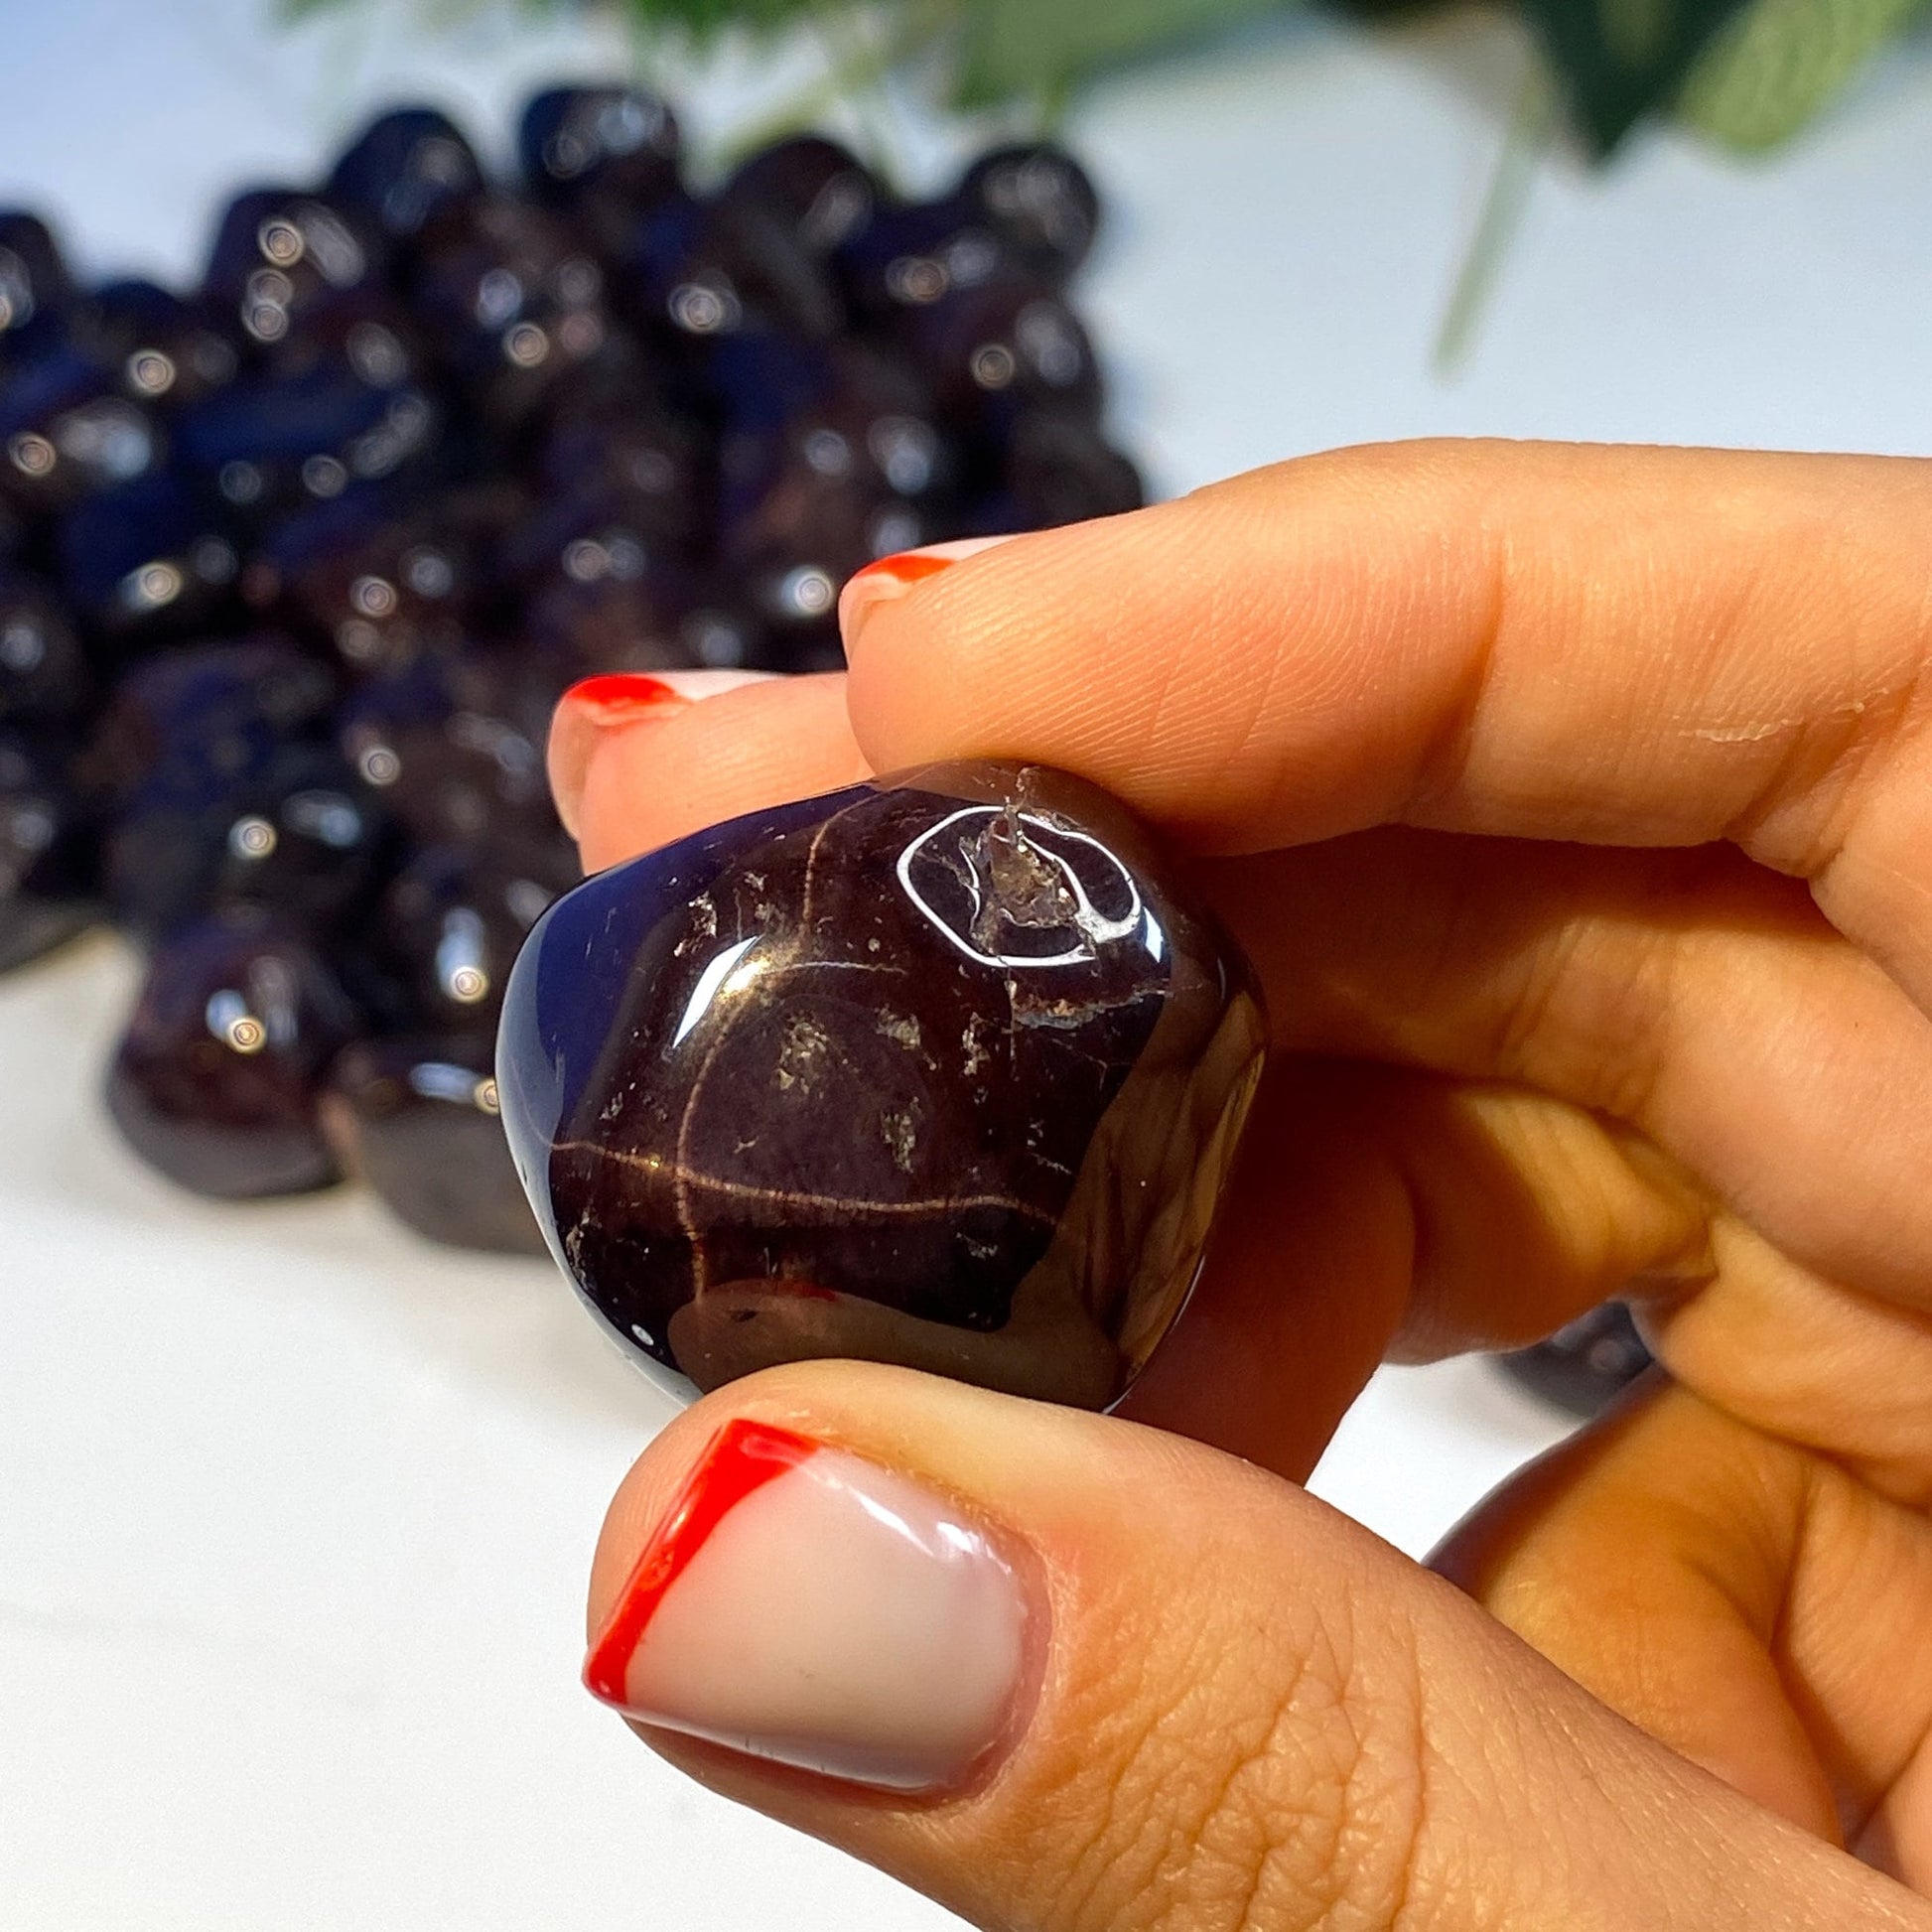 Natural Garnet Crystal - Red Brown Tumbled Stone - Love and Recovery Crystals - genuine healing stones for root and heart chakra